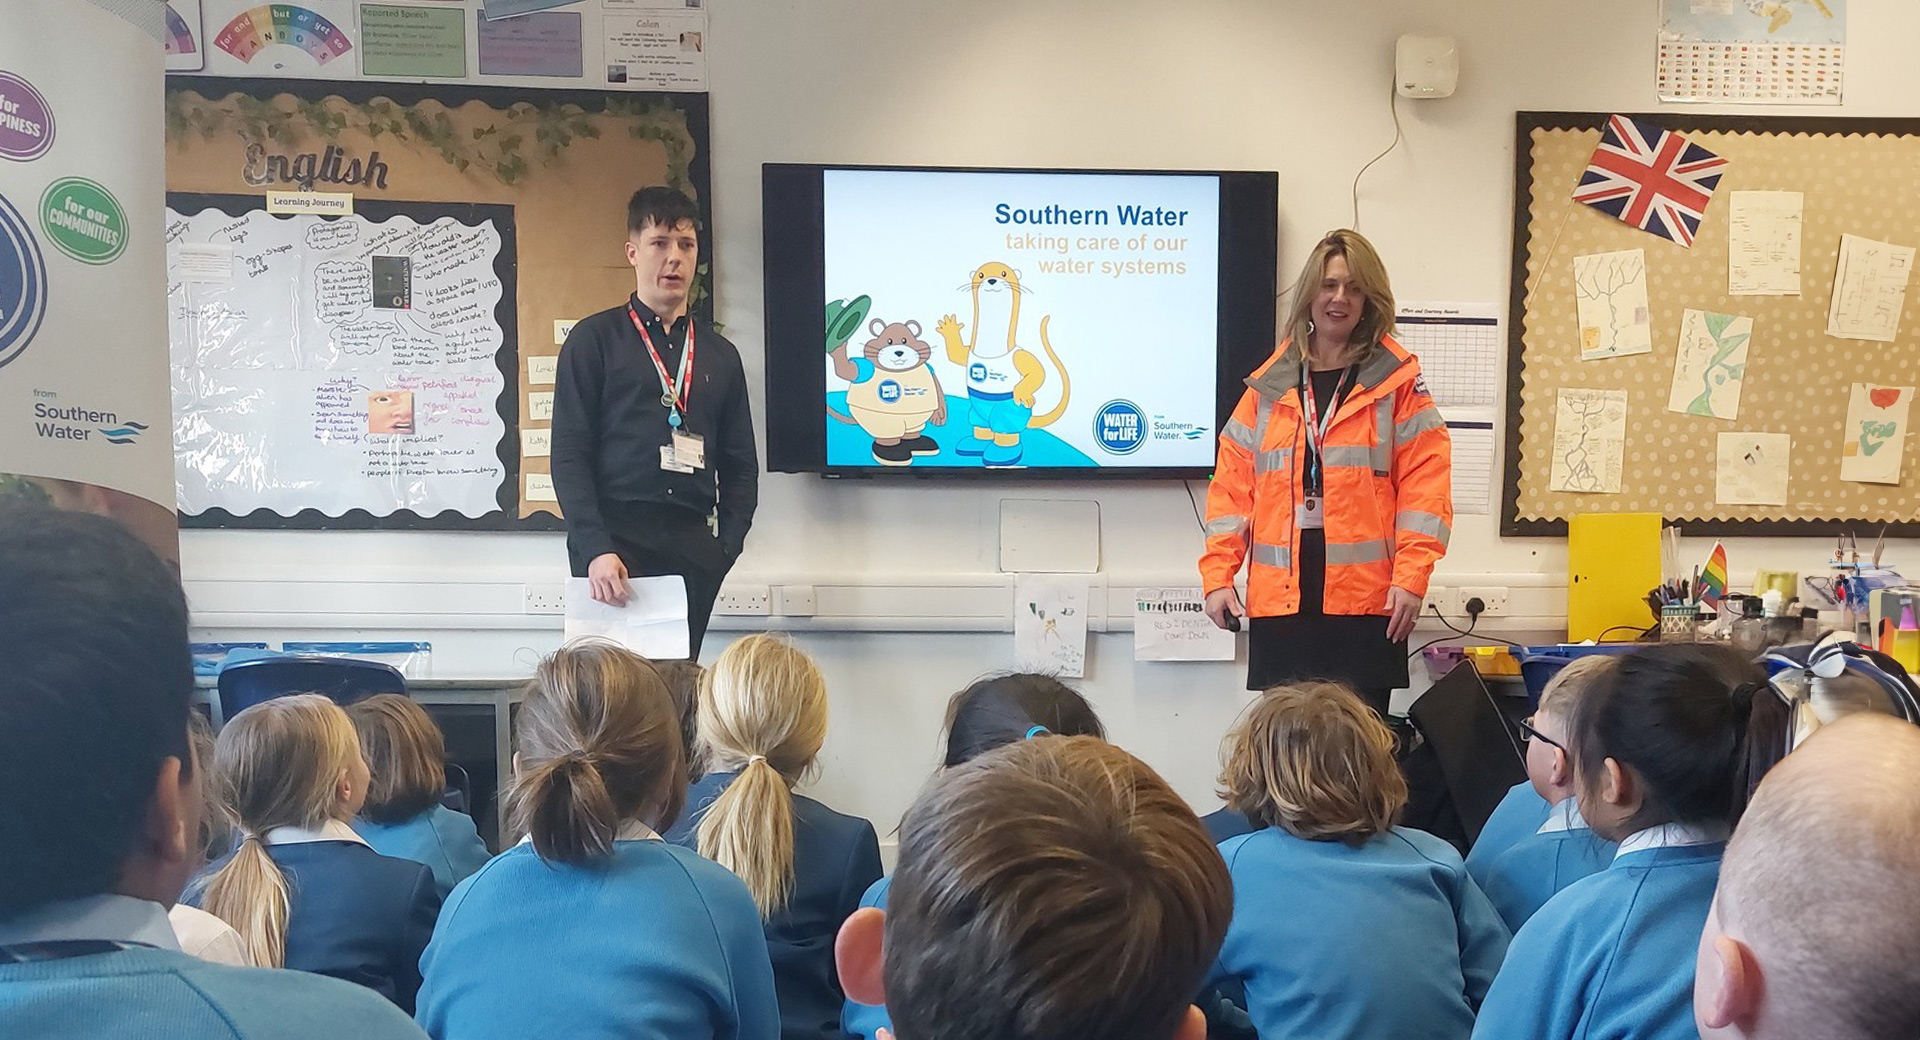 Southern water employees delivering a presentation infront of a class of schoolchildren